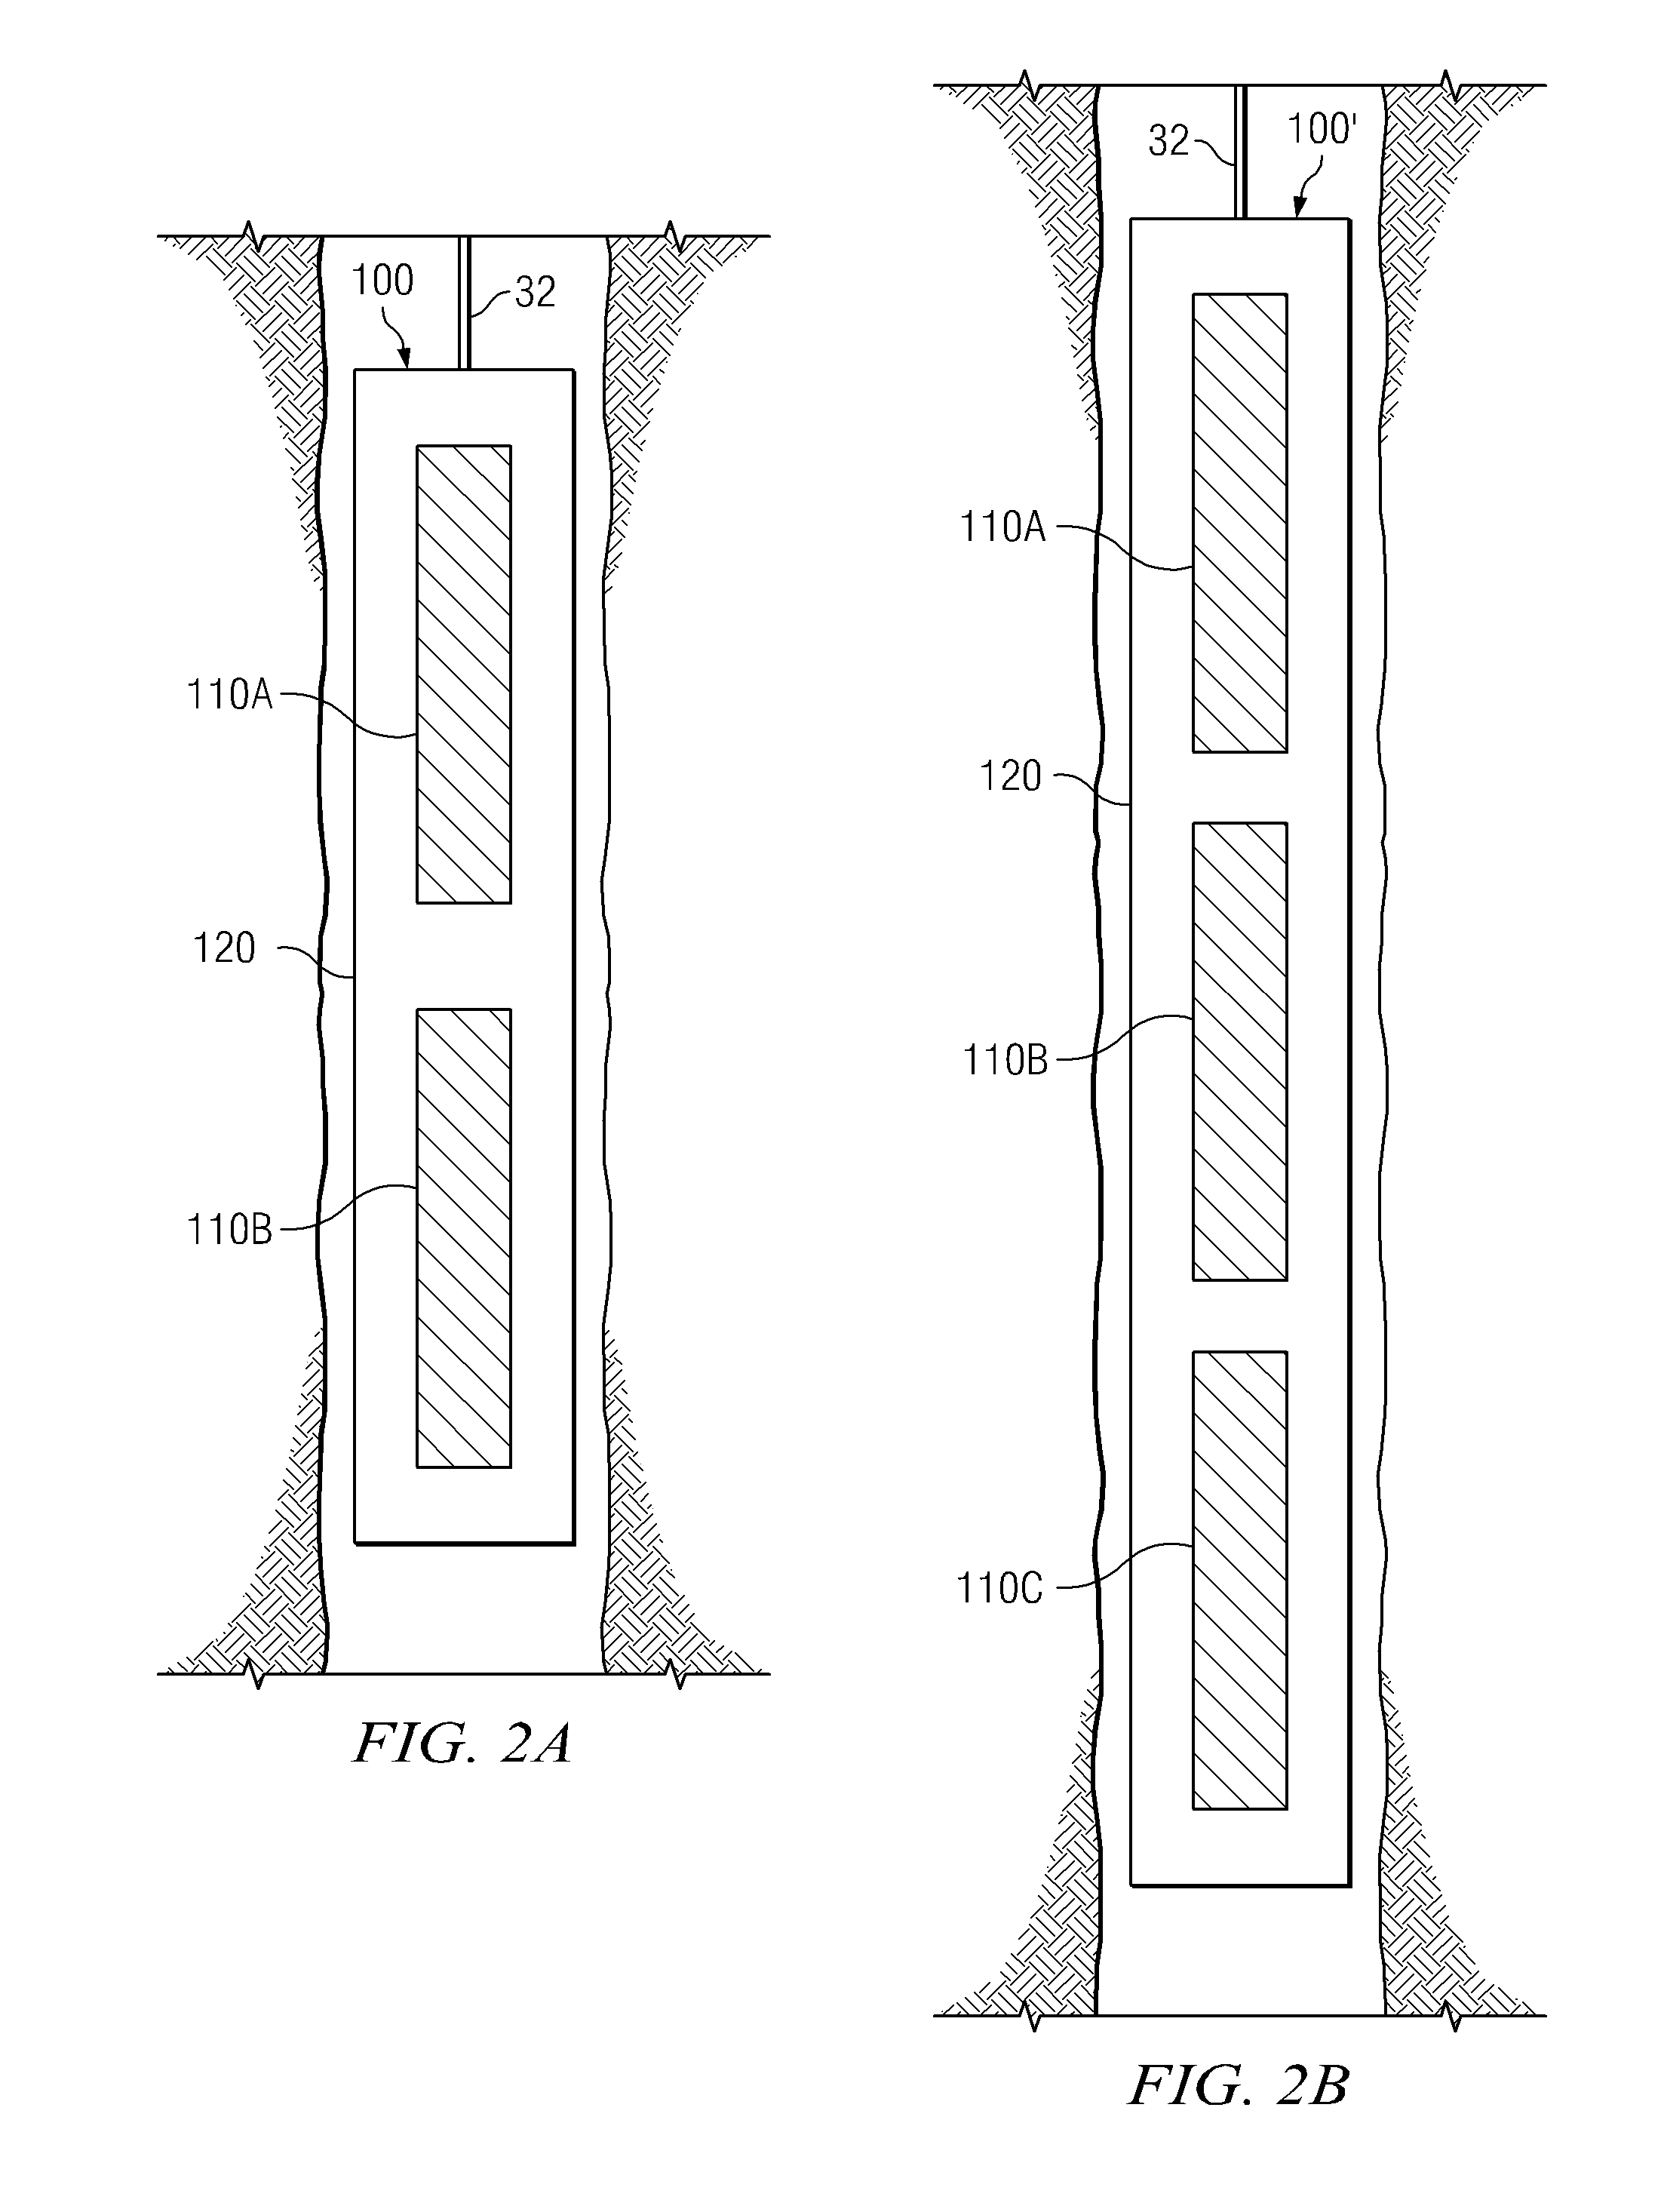 Electromagnetic array for subterranean magnetic ranging operations